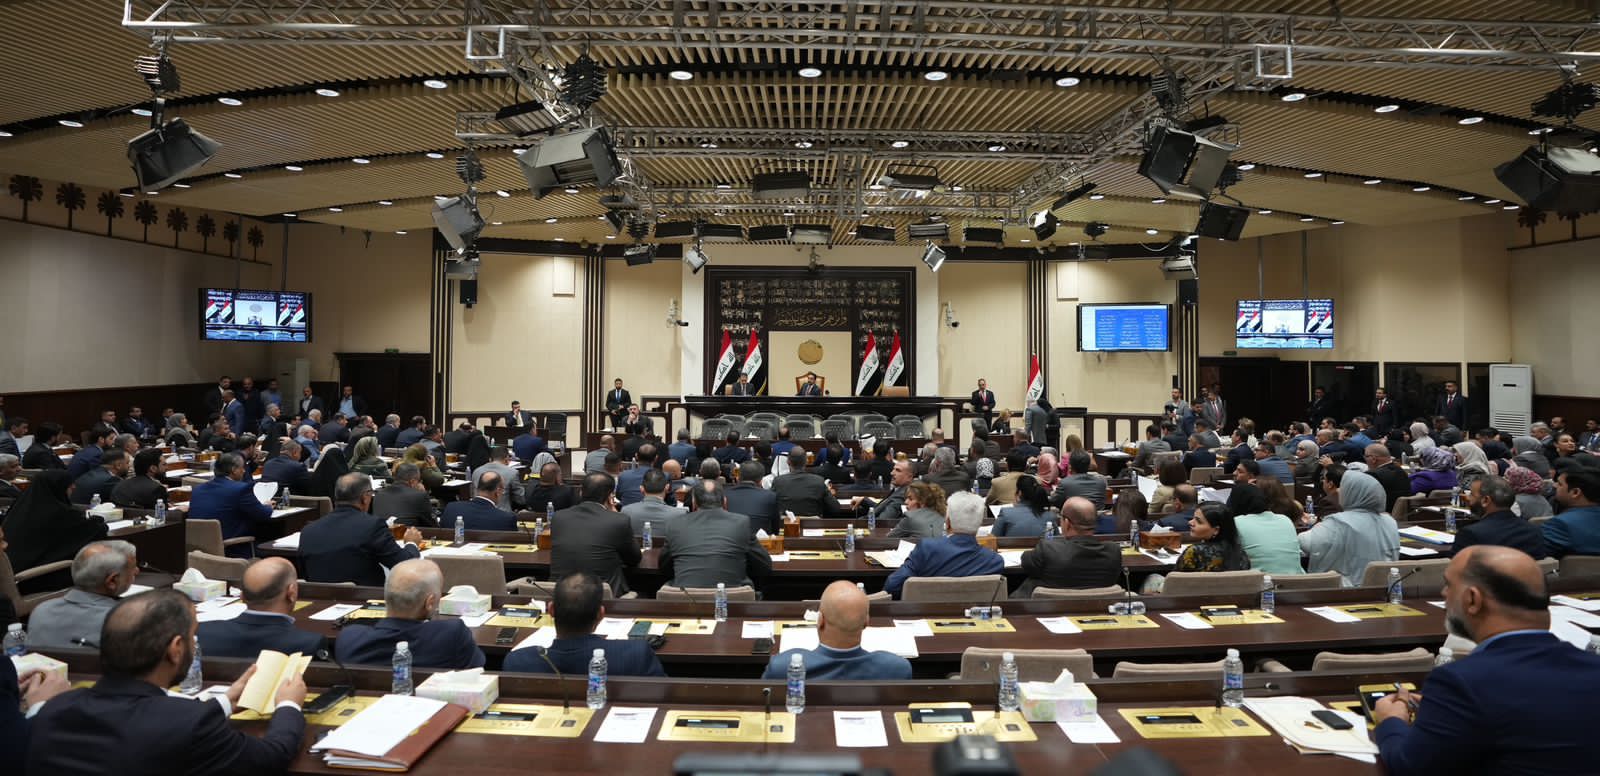 Parliament hosts two ministers in al-Sudani's government